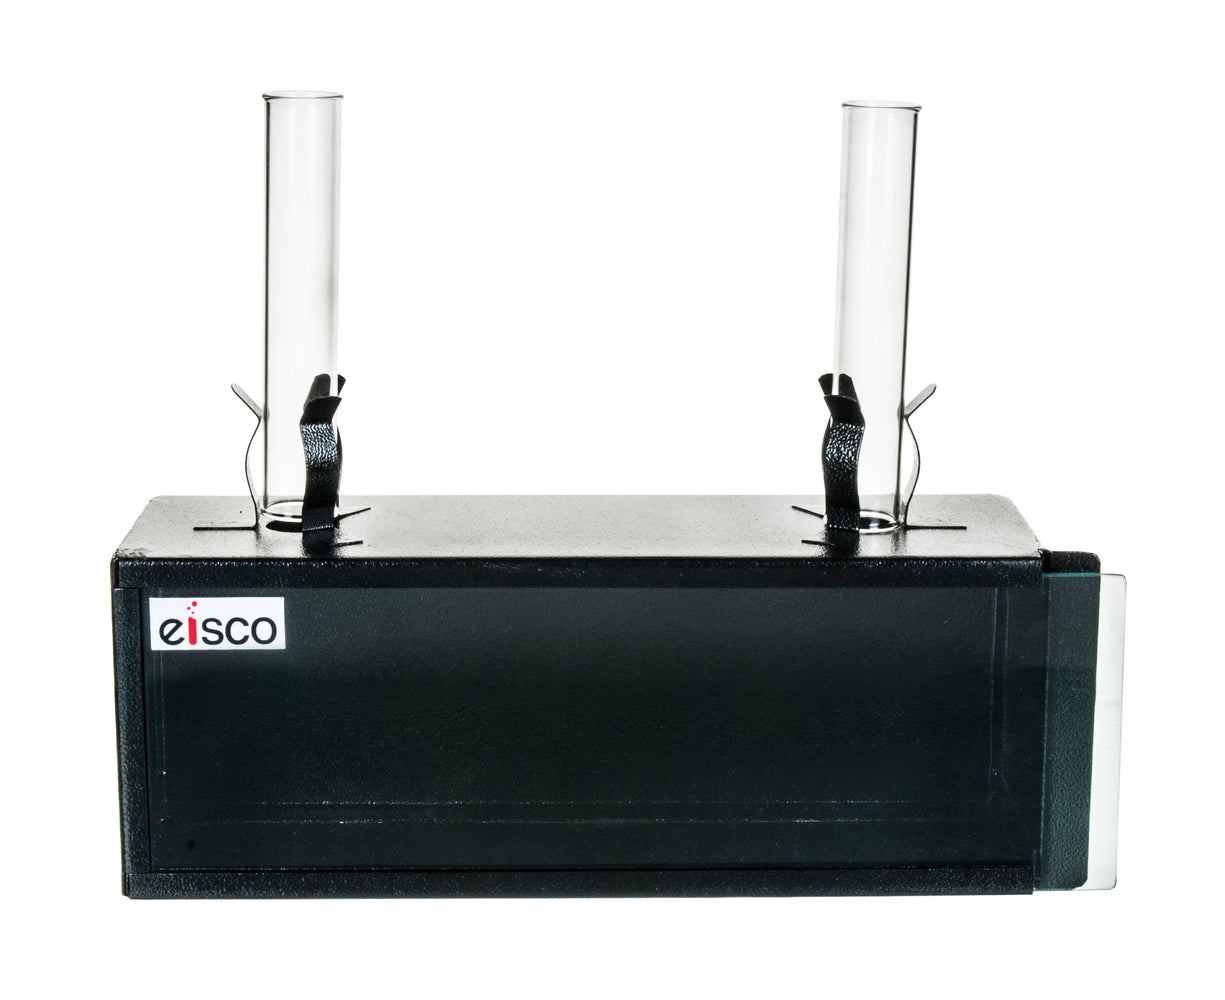 Eisco Labs Convection of Gas Apparatus, 10" x 4" x 3"